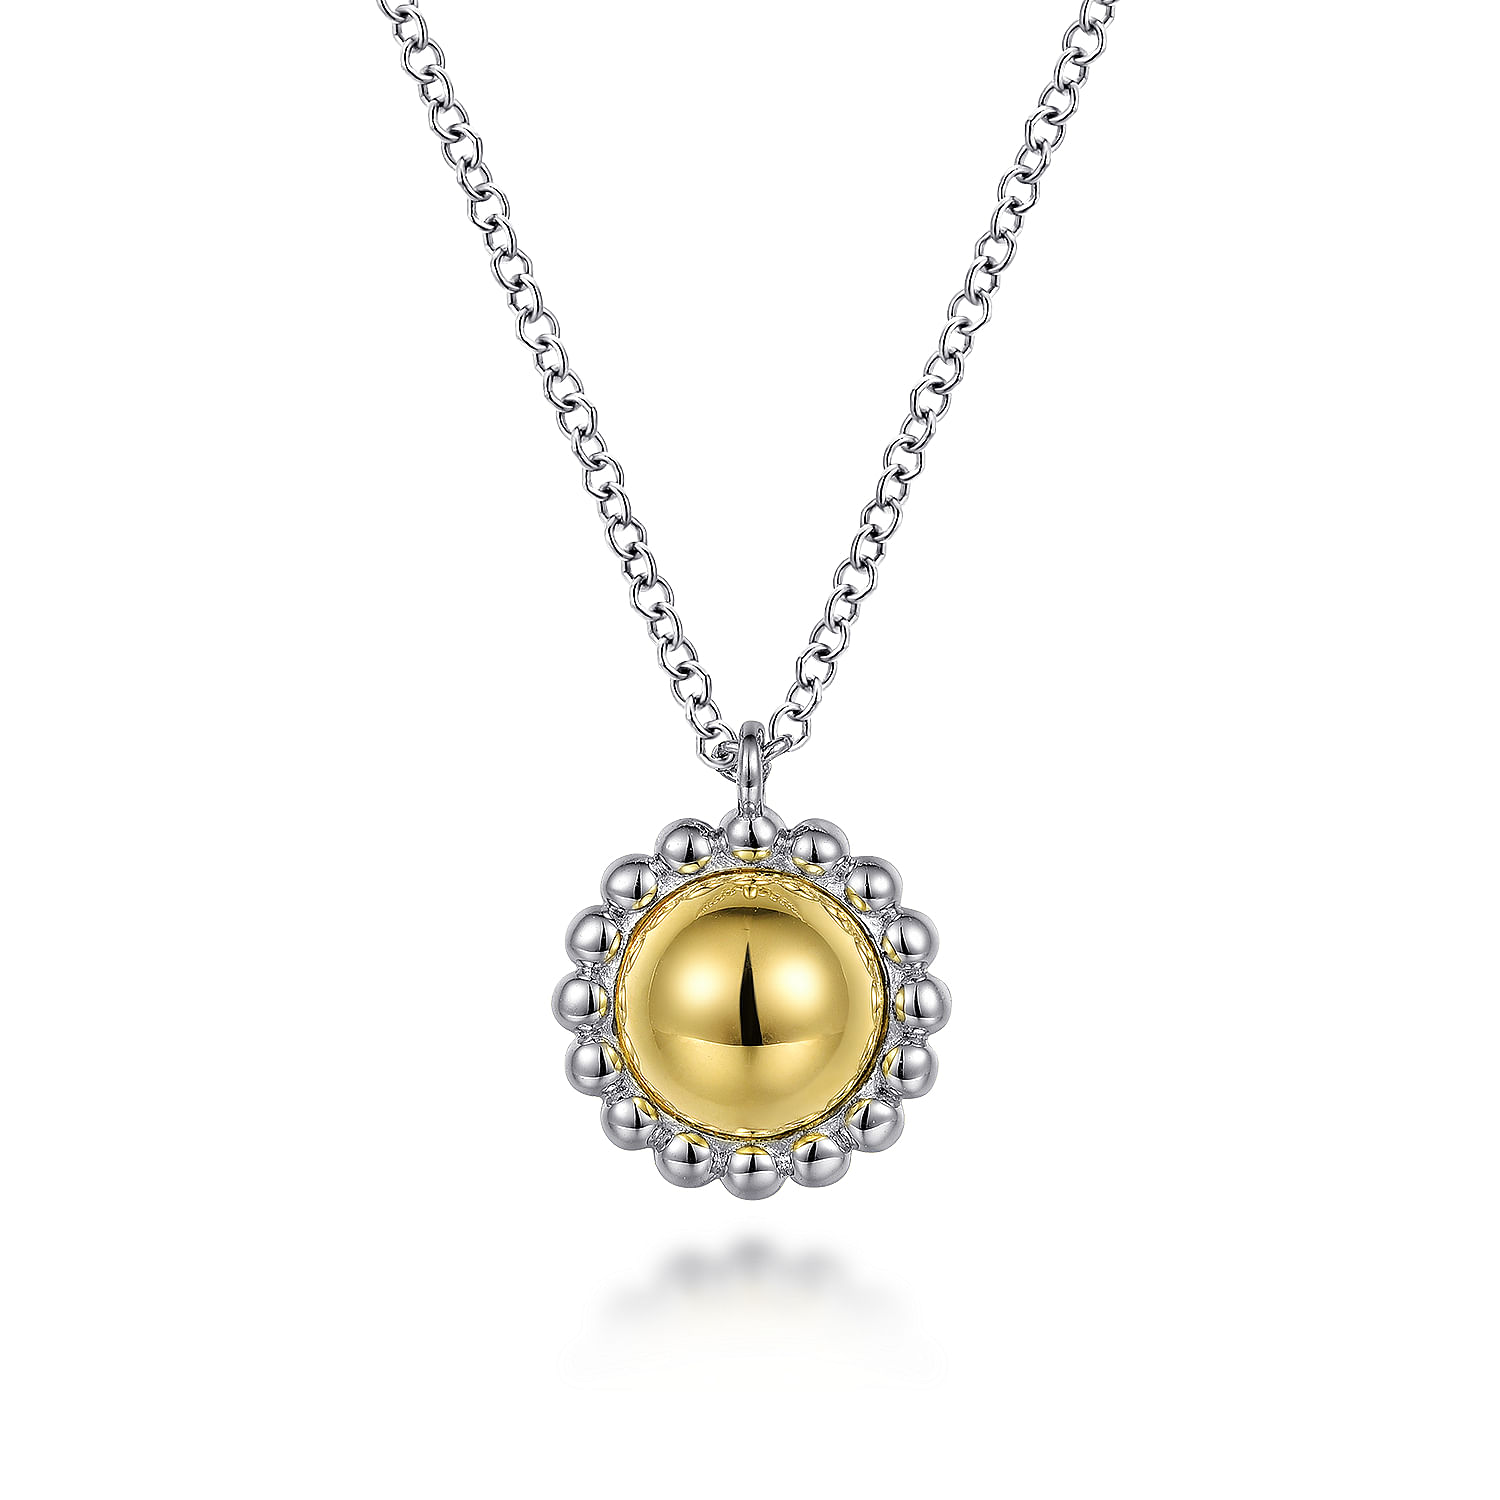 925-Sterling-Silver-and-14K-Yellow-Gold-Fashion-Pendant-Necklace1